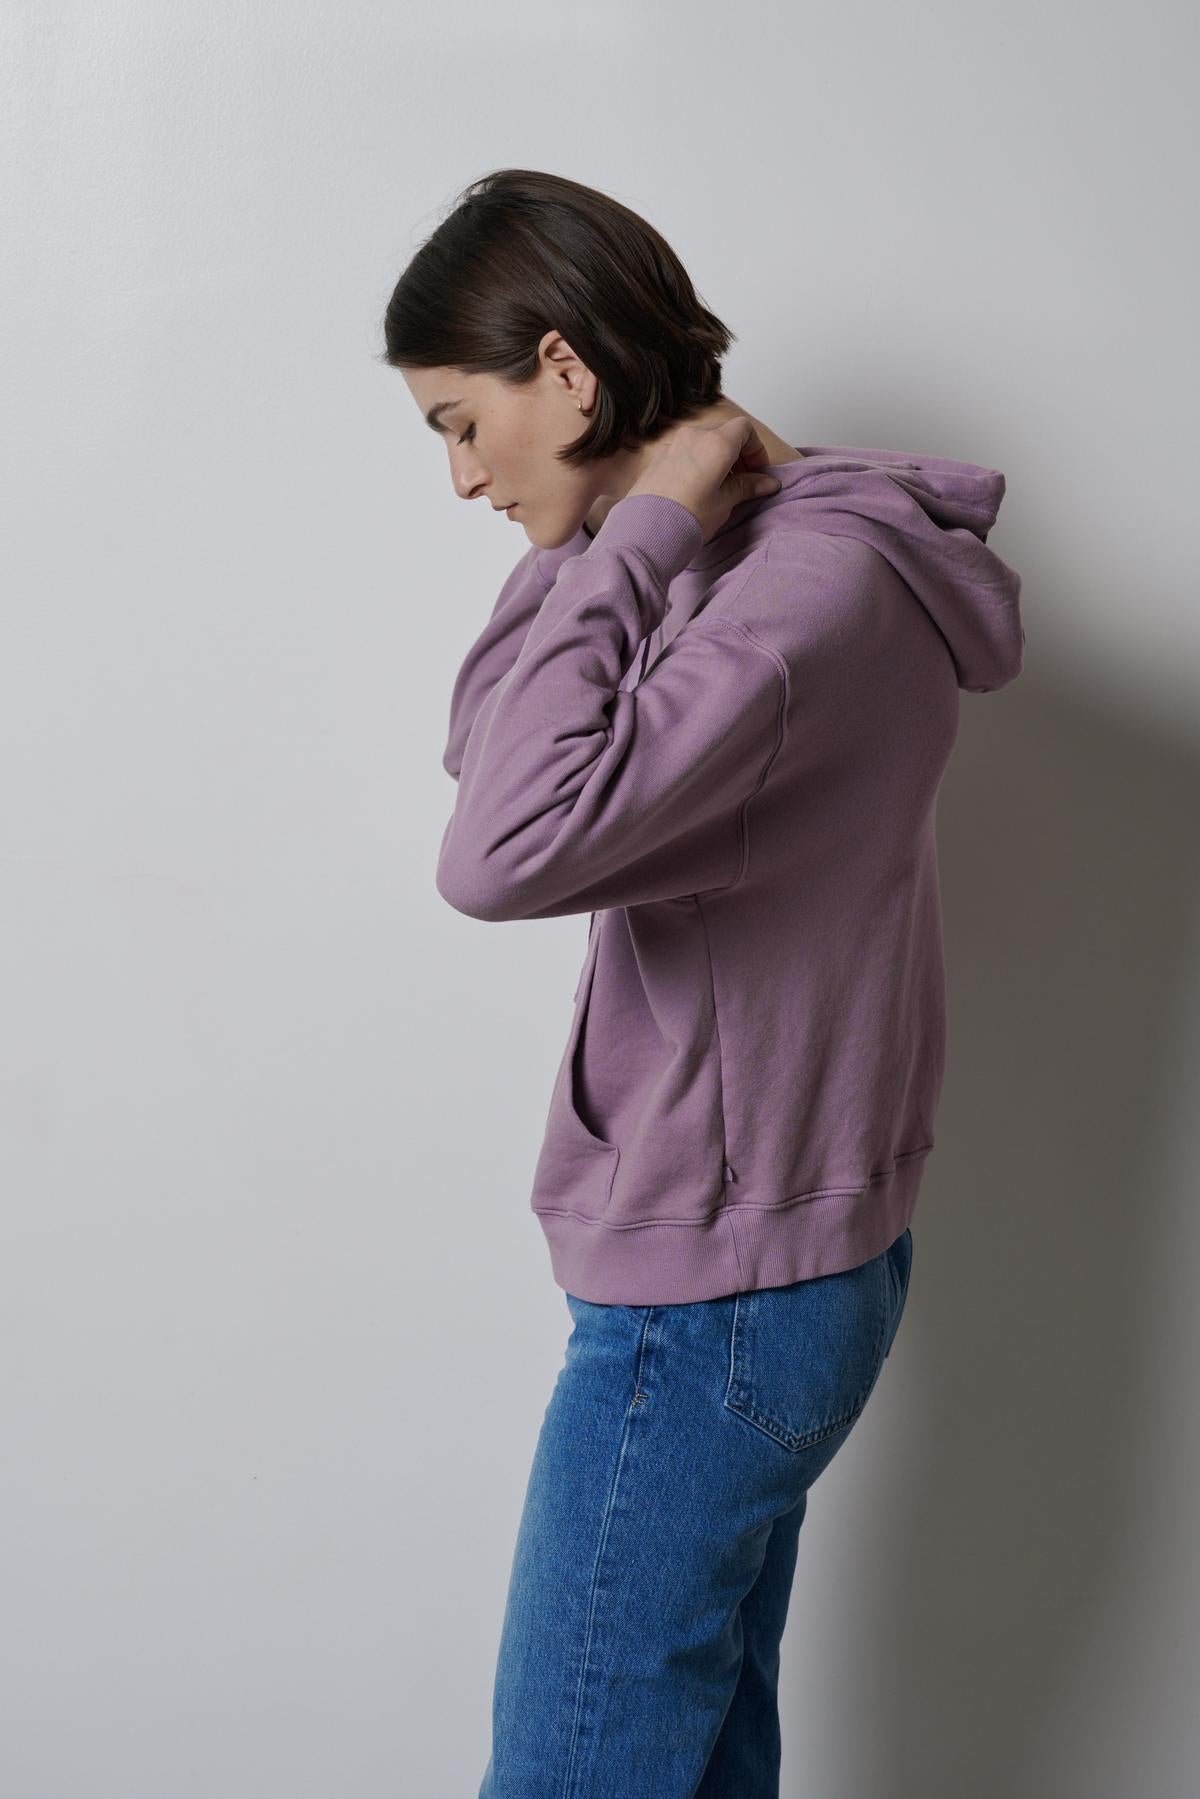 A woman wearing an OJAI HOODIE by Velvet by Jenny Graham and jeans.-35783045480641